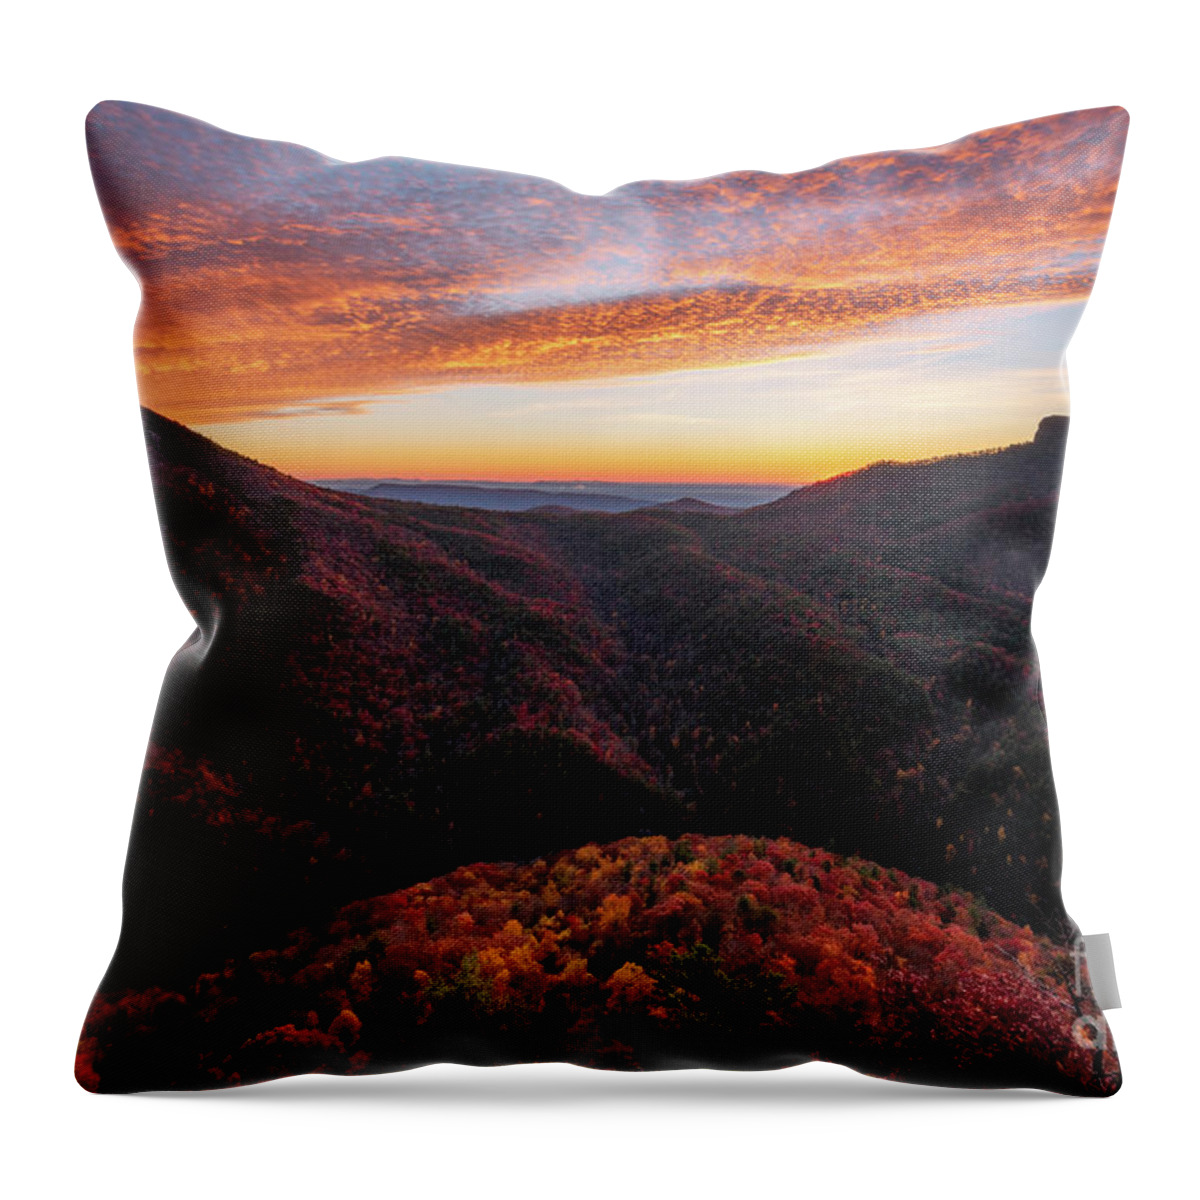 Linville Gorge Throw Pillow featuring the photograph Linville Gorge by Anthony Heflin